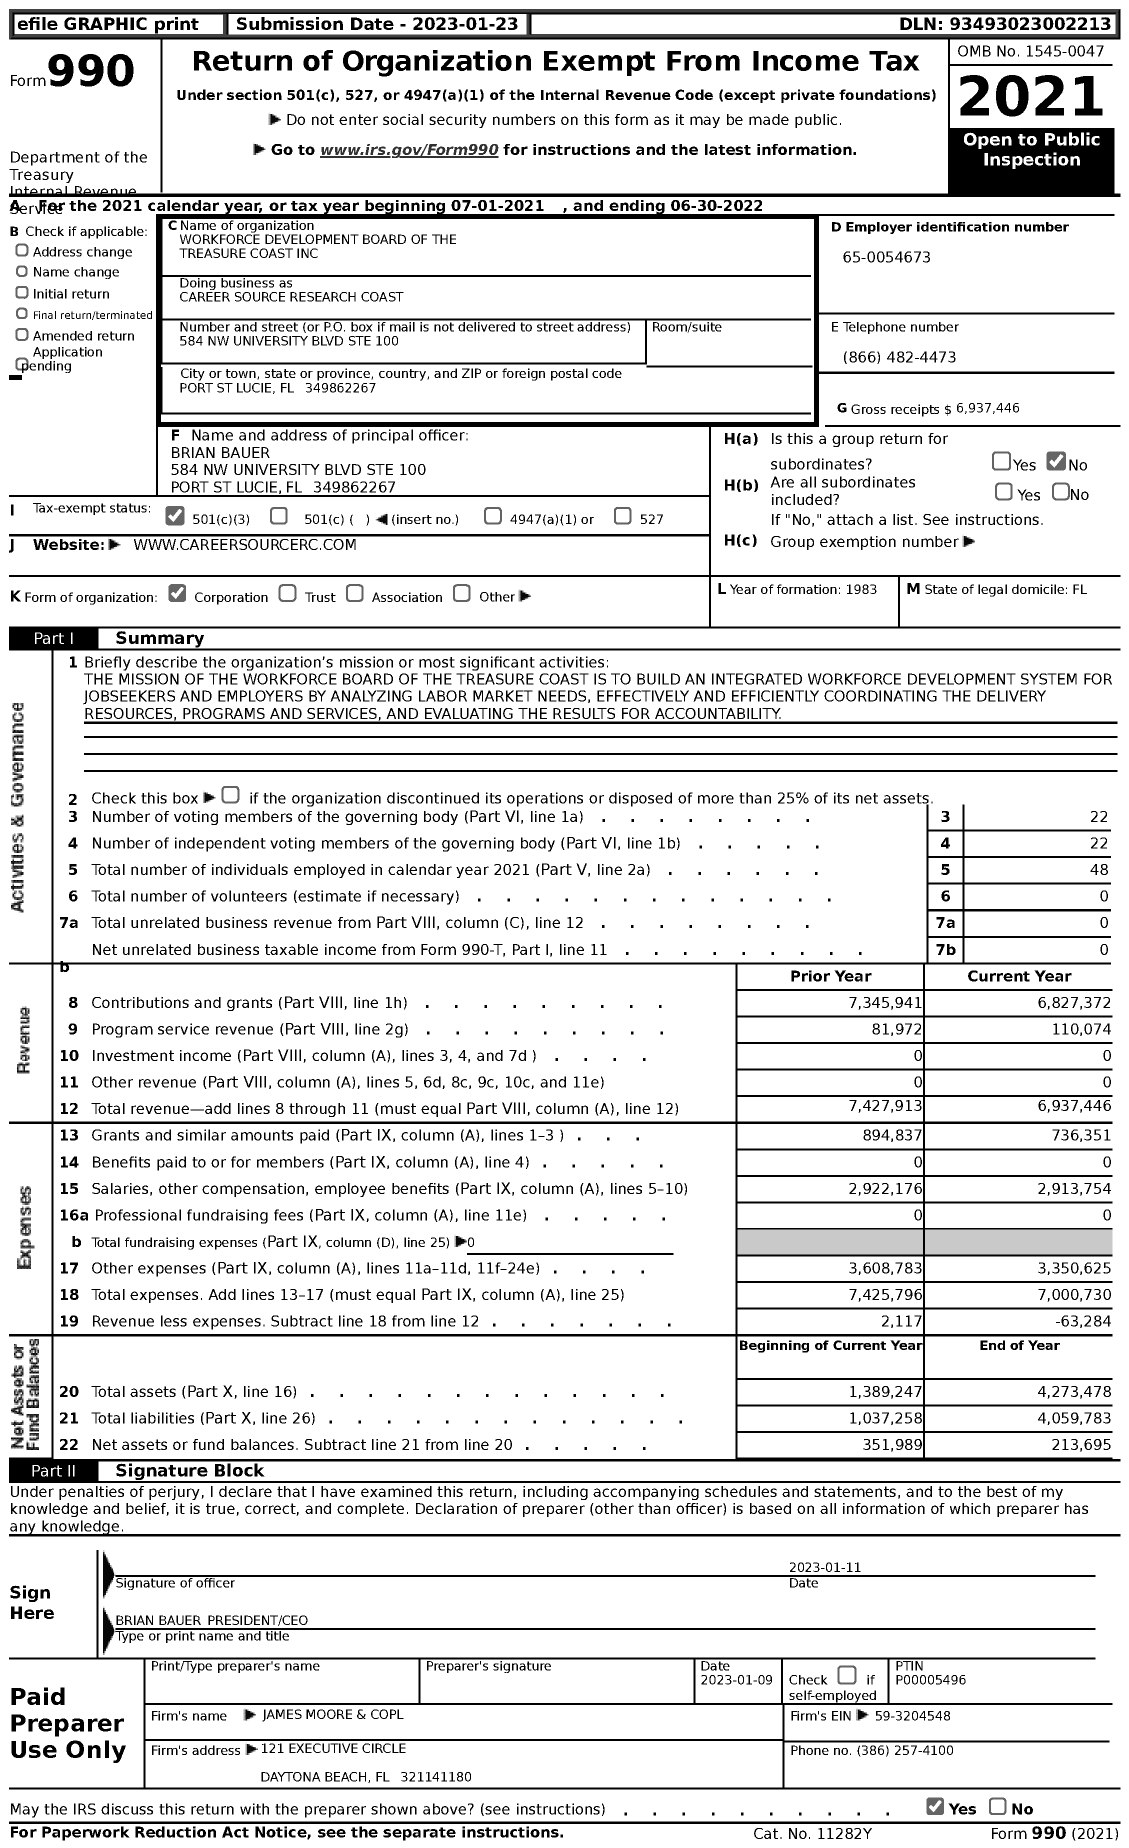 Image of first page of 2021 Form 990 for Career Source Research Coast